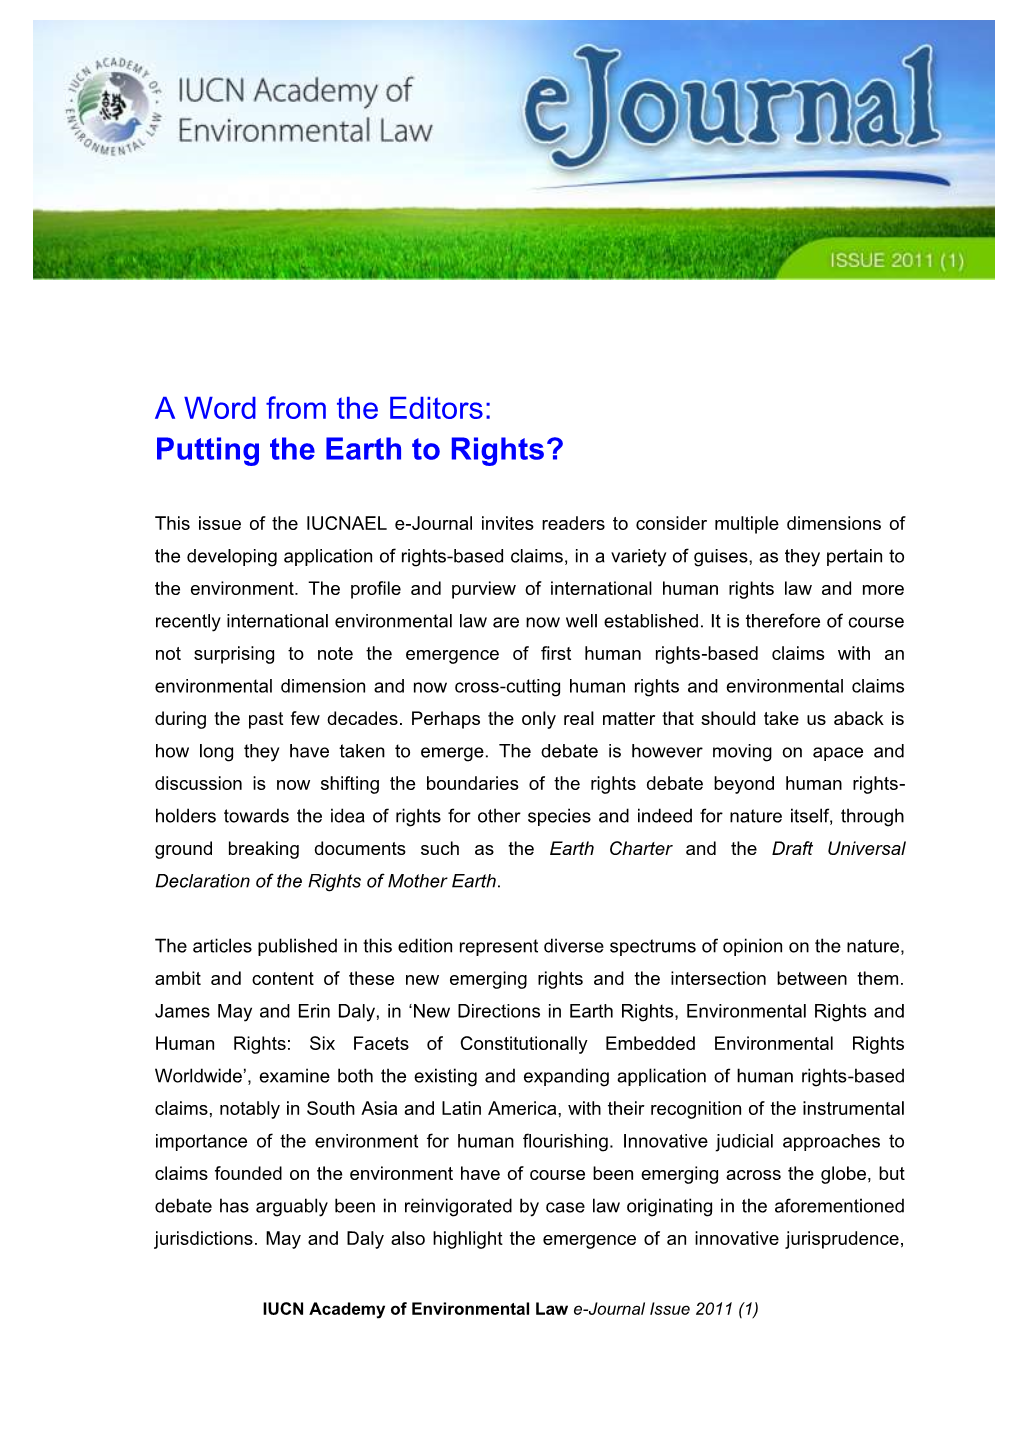 Putting the Earth to Rights?